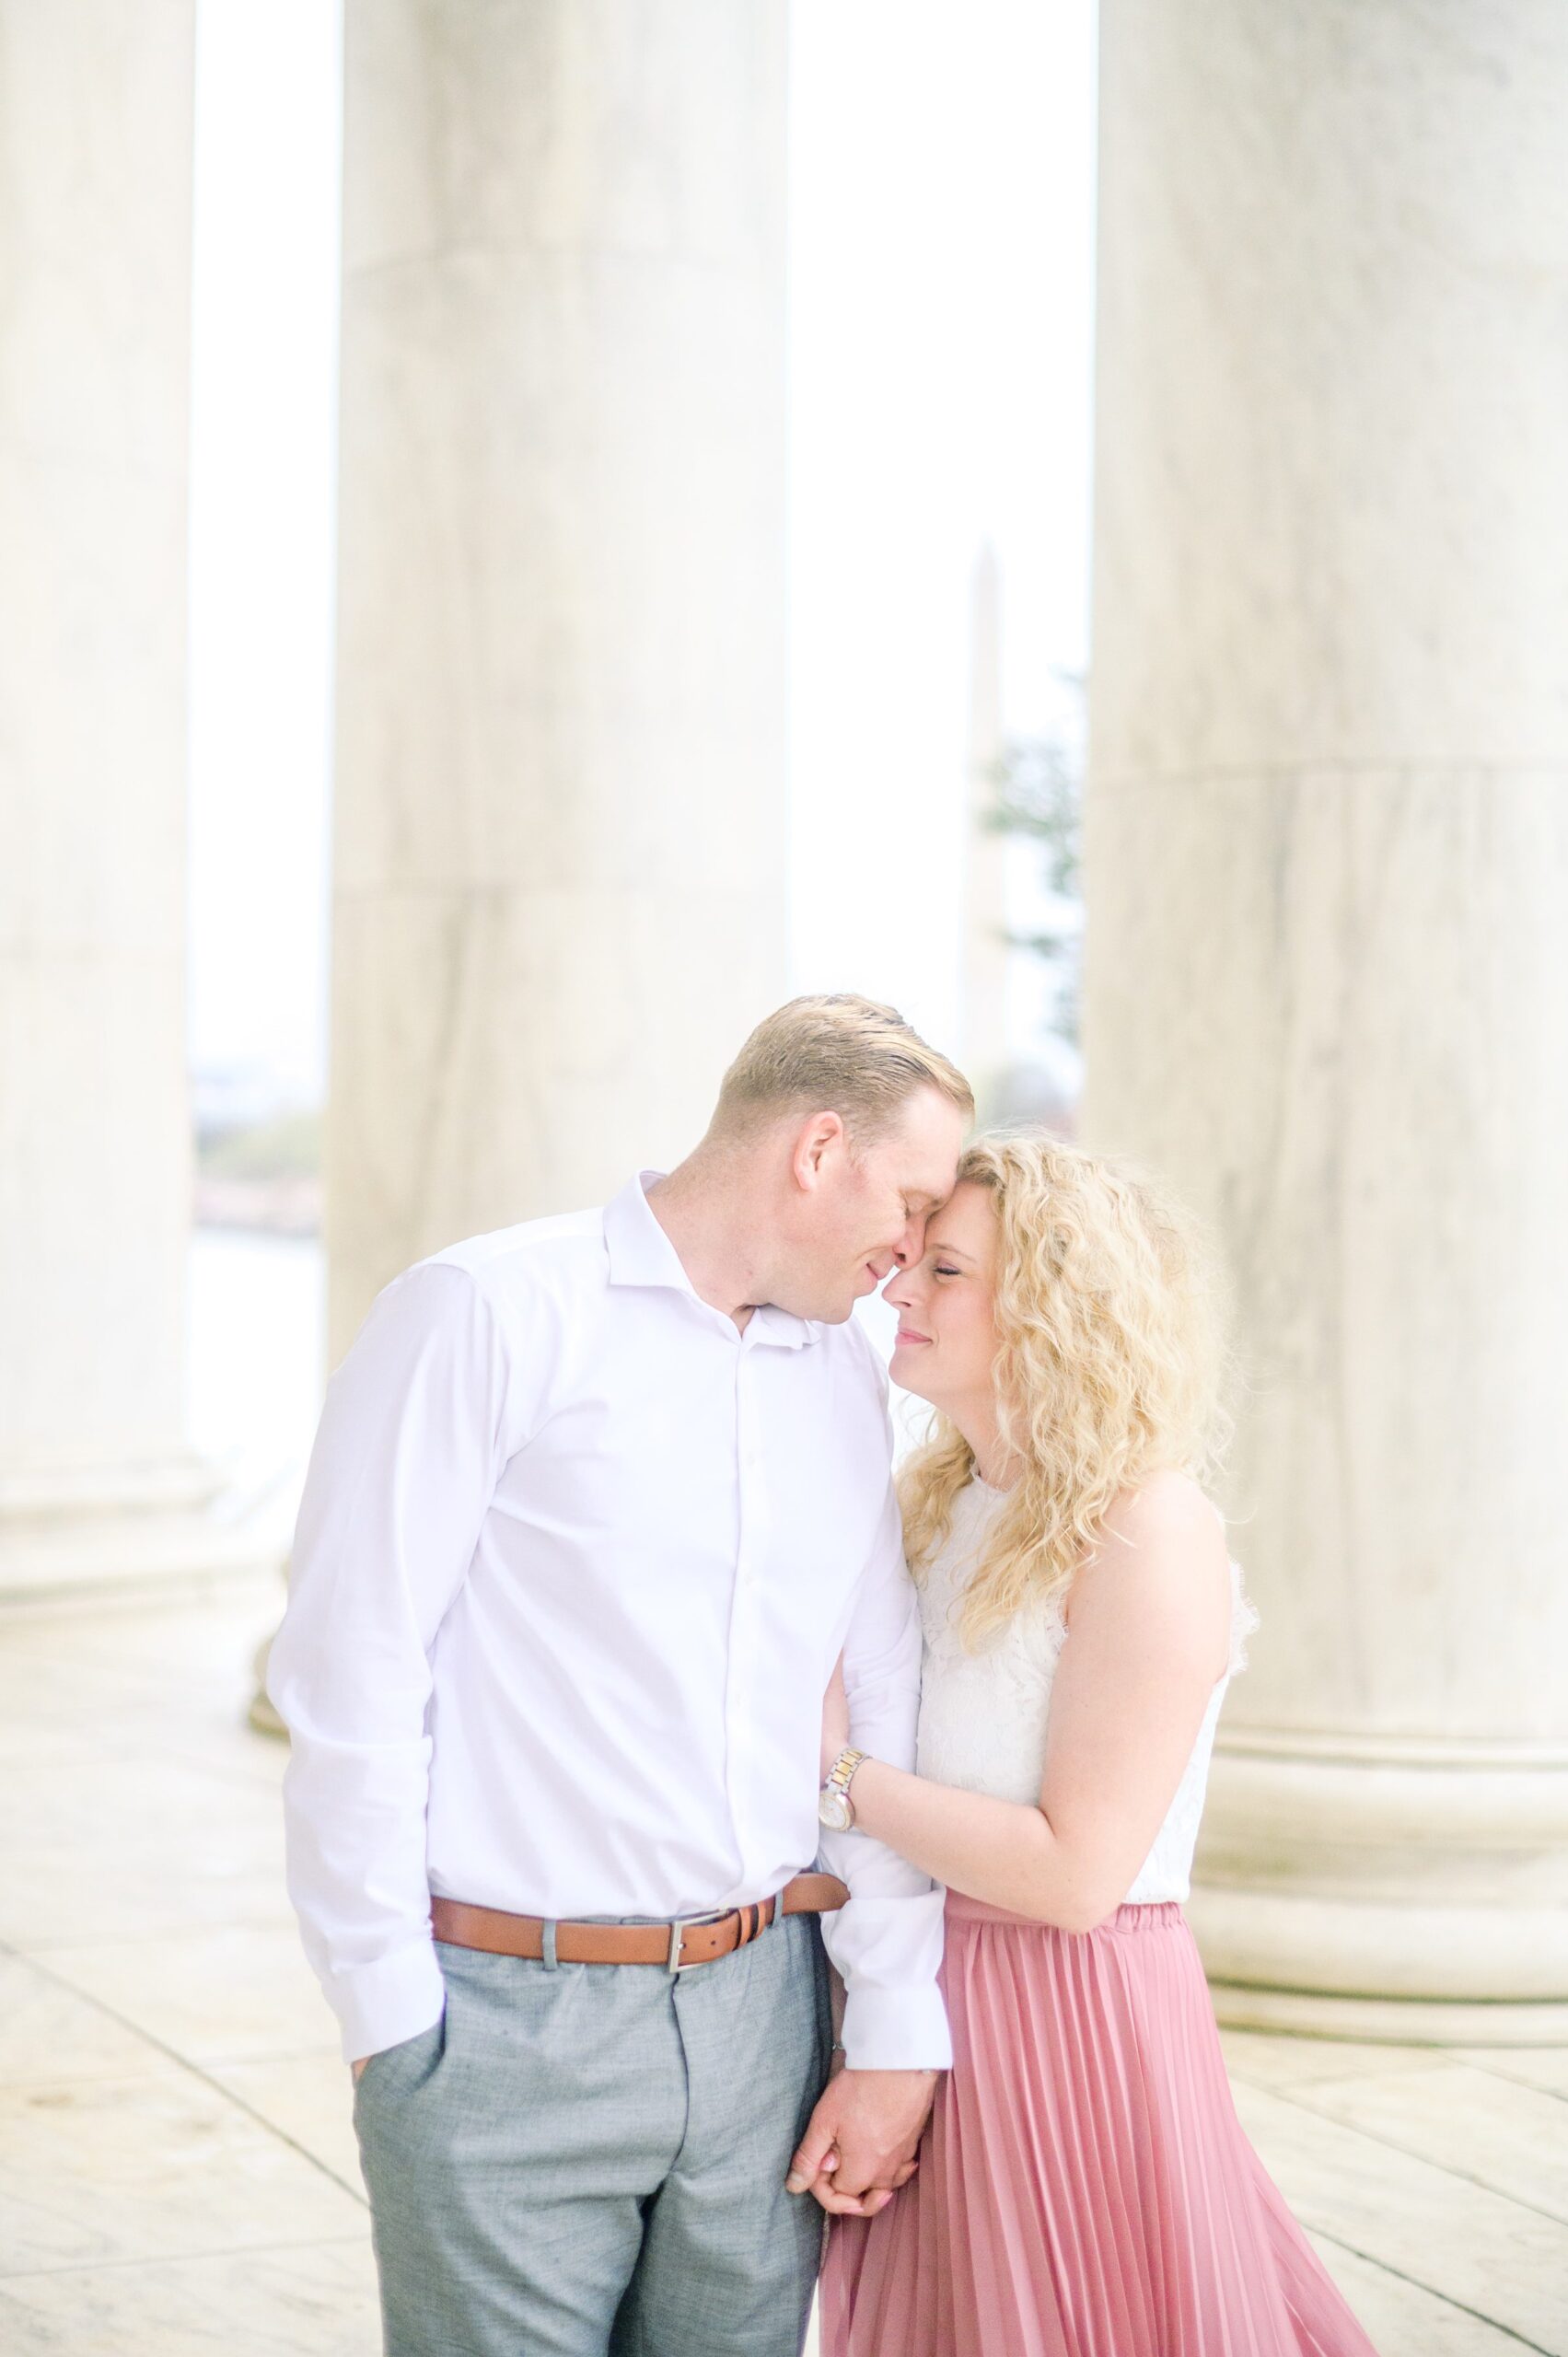 Anniversary portrait session at the Jefferson Memorial featuring the Washington DC Cherry Blossoms. Photographed by Baltimore Photographer Cait Kramer Photography